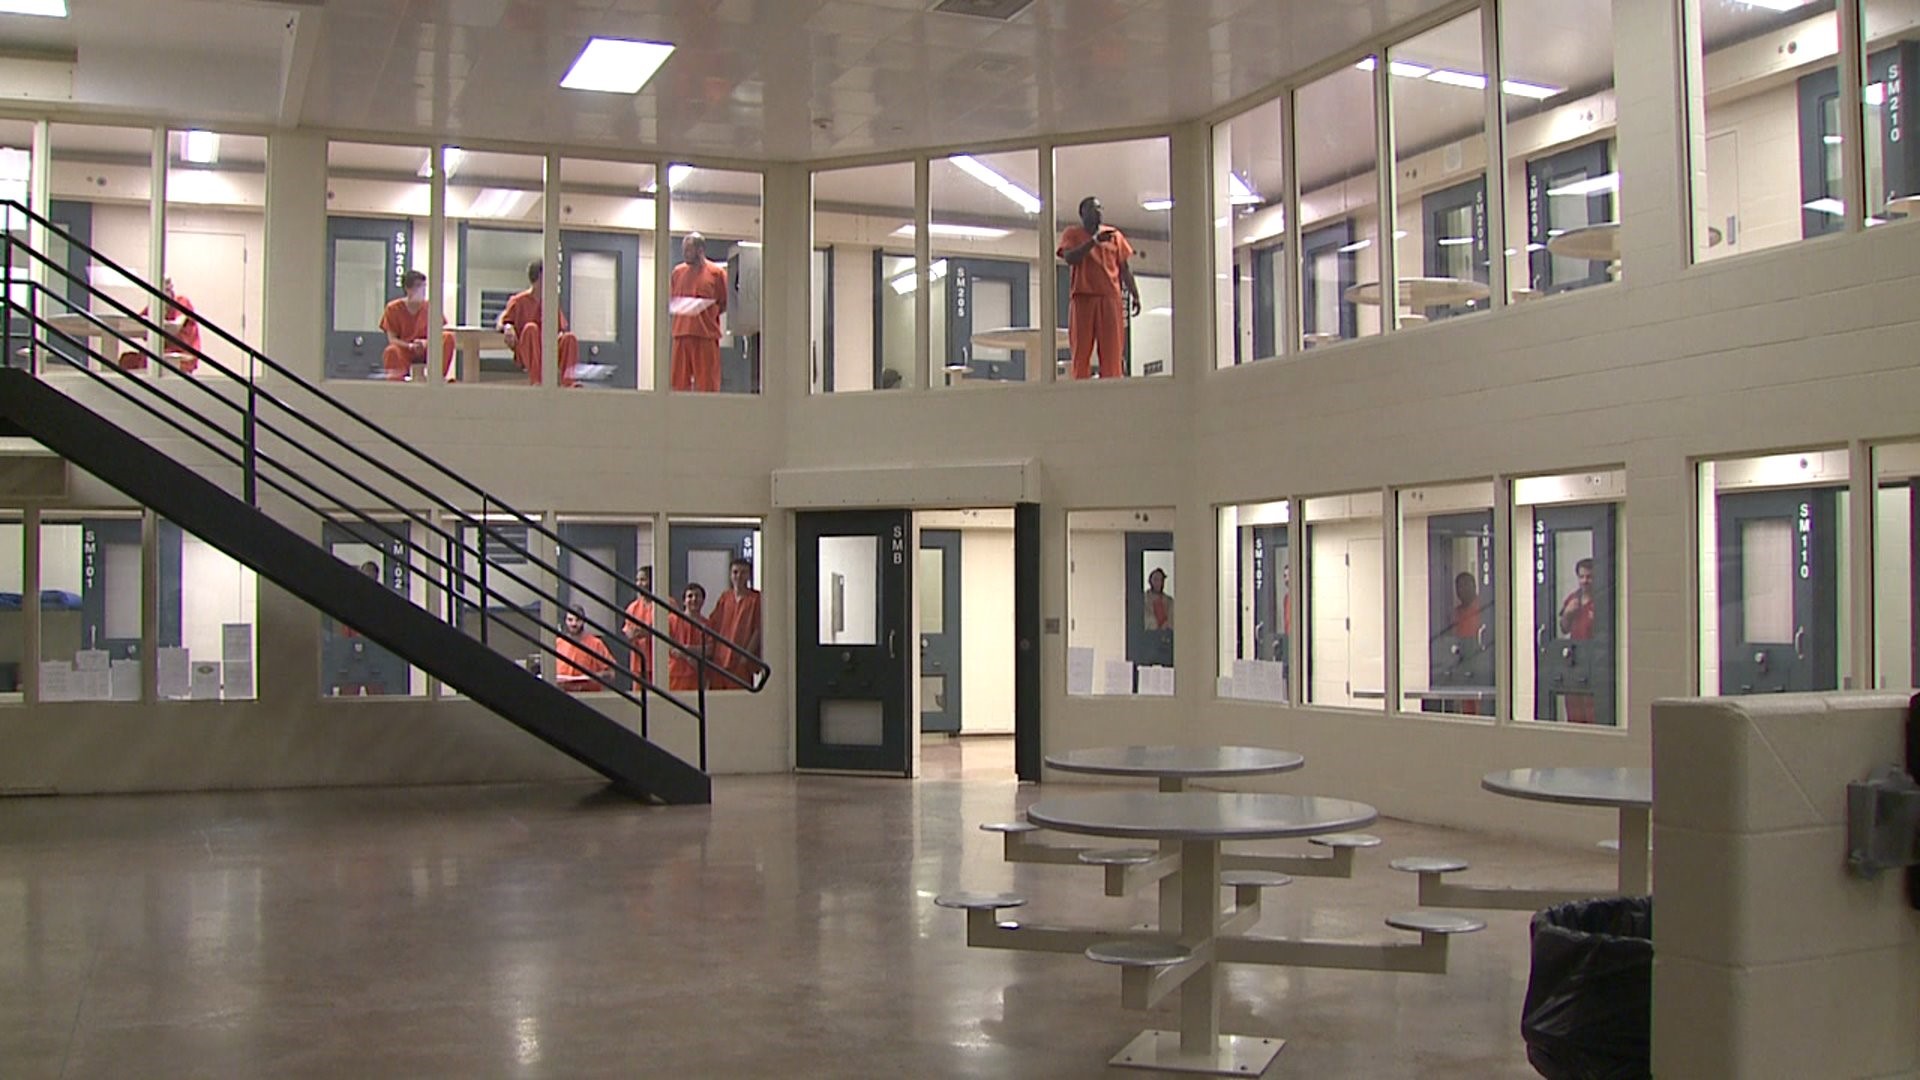 Study suggests Scott County needs to grow Jail and Juvenile Detention Center